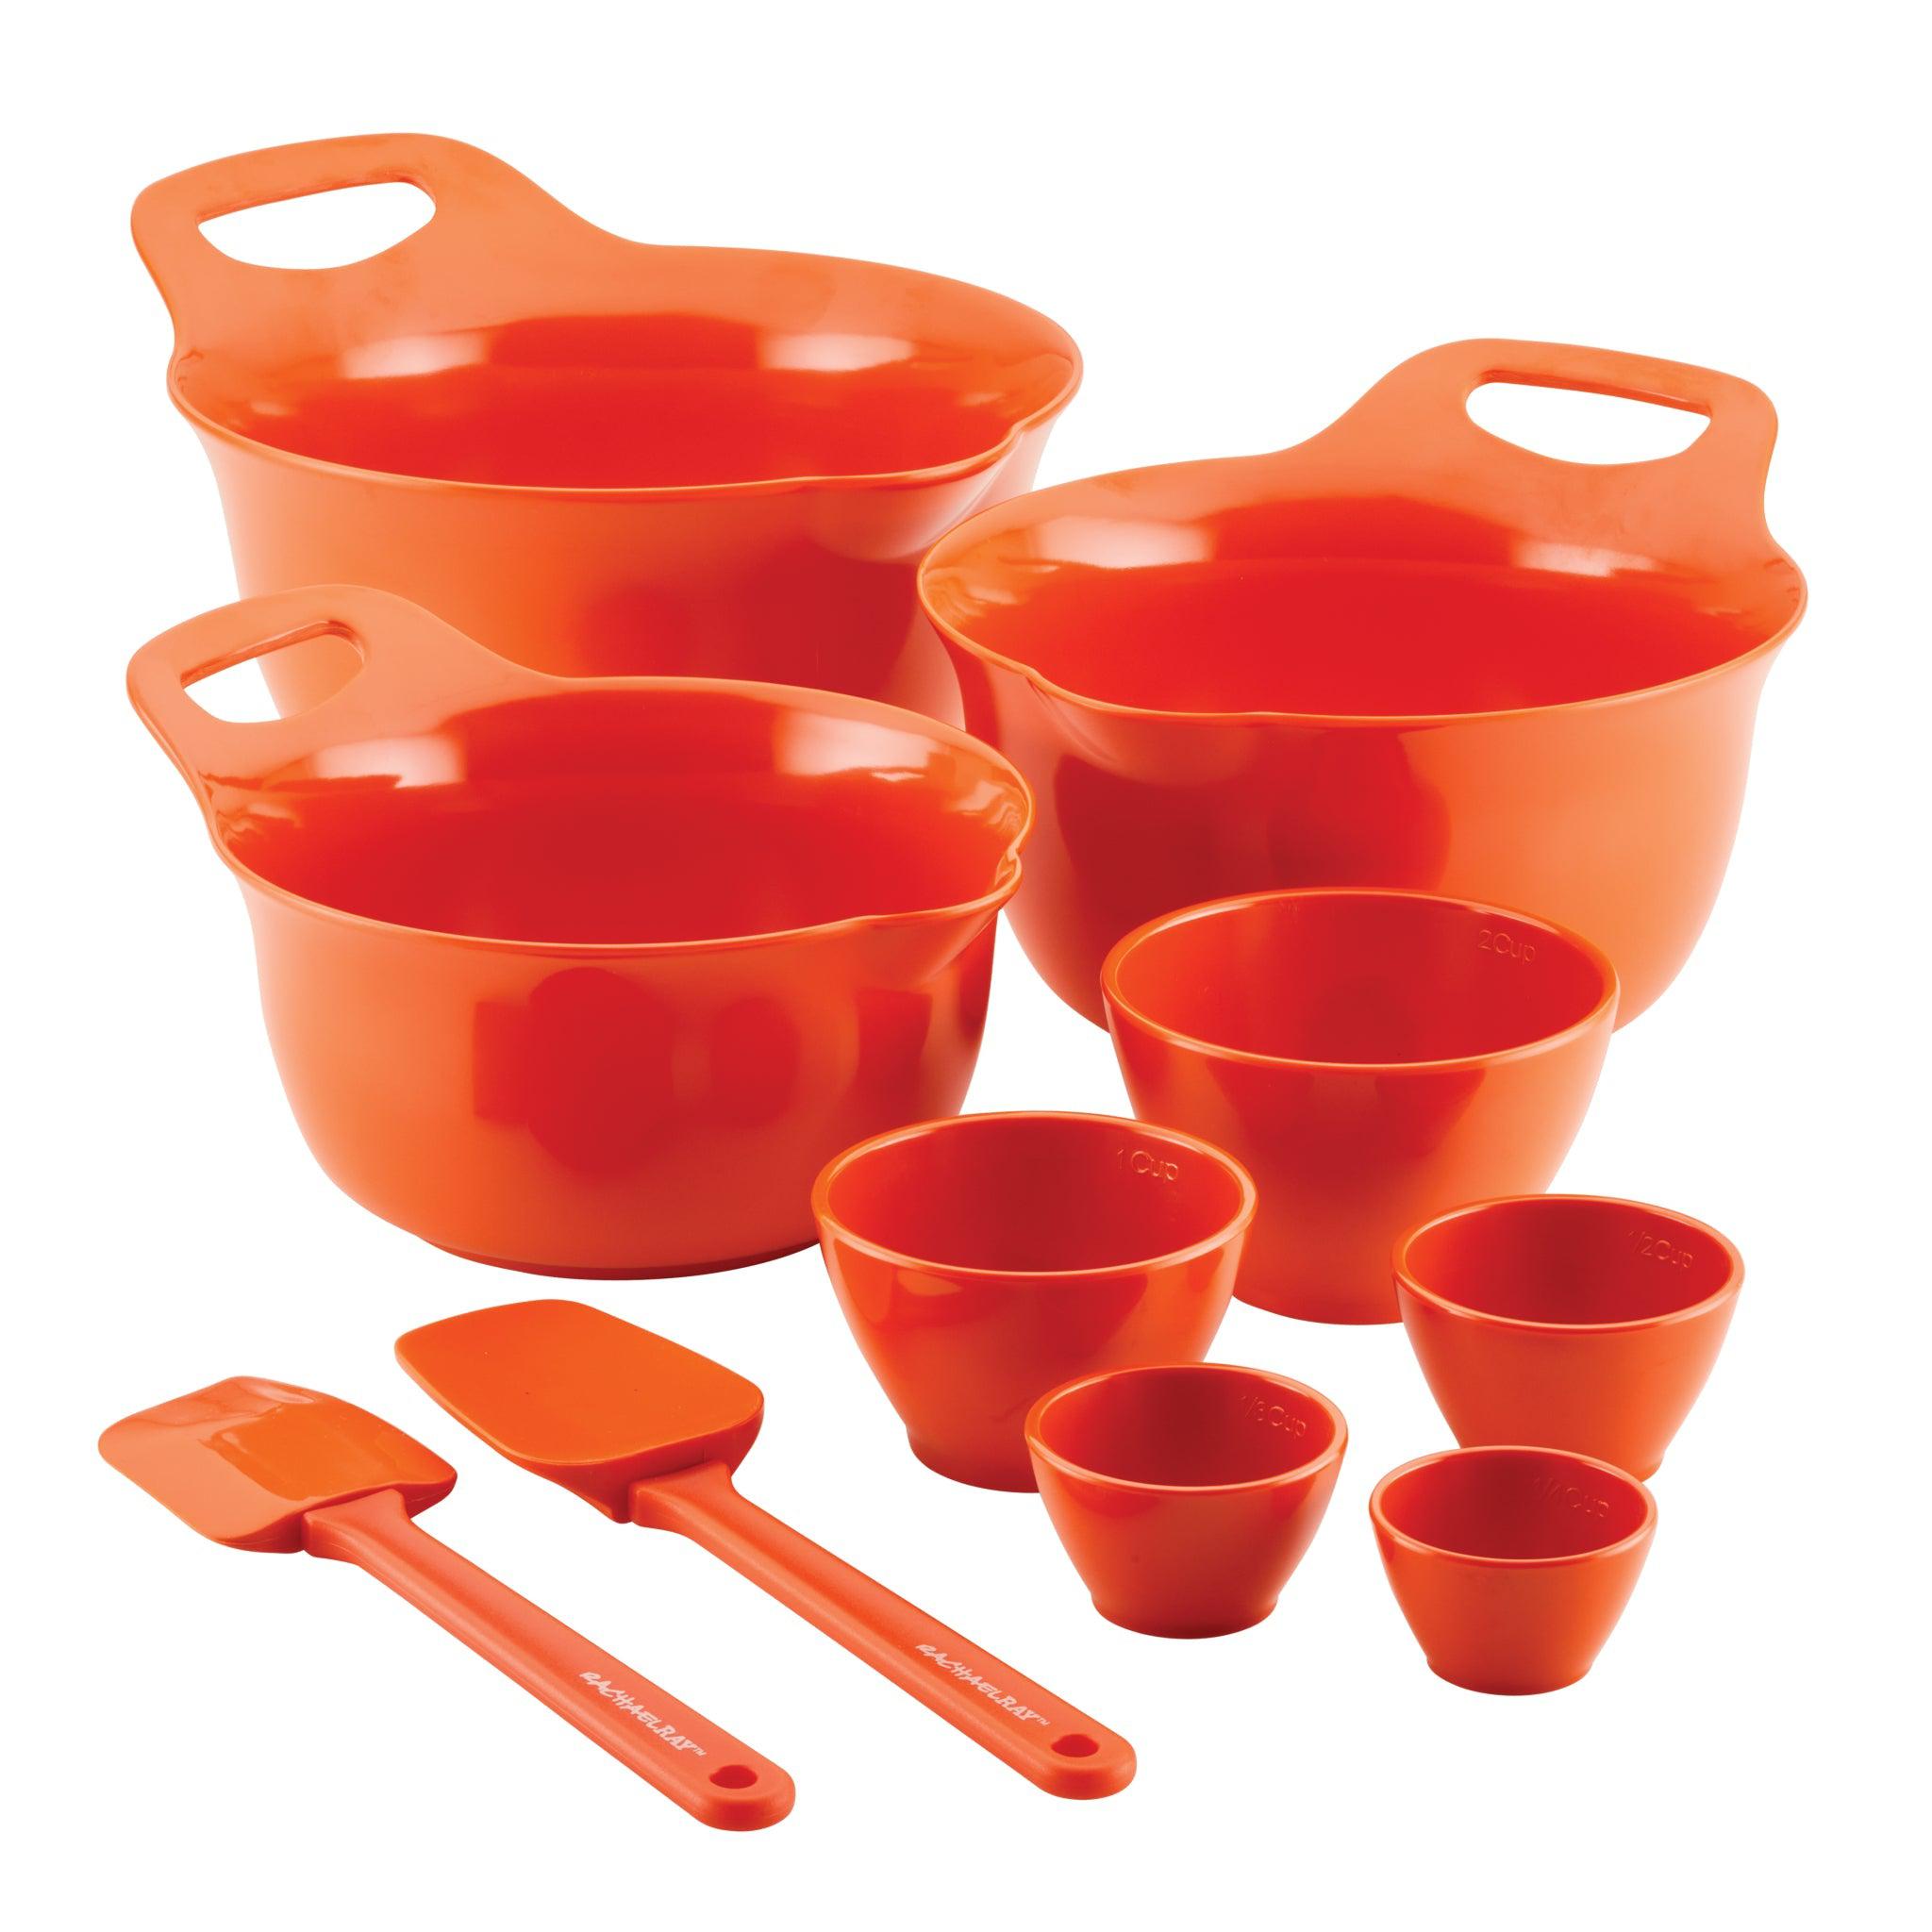 Rachael Ray Melamine Nesting Measuring Cups, 5-Piece Set, Assorted Colors